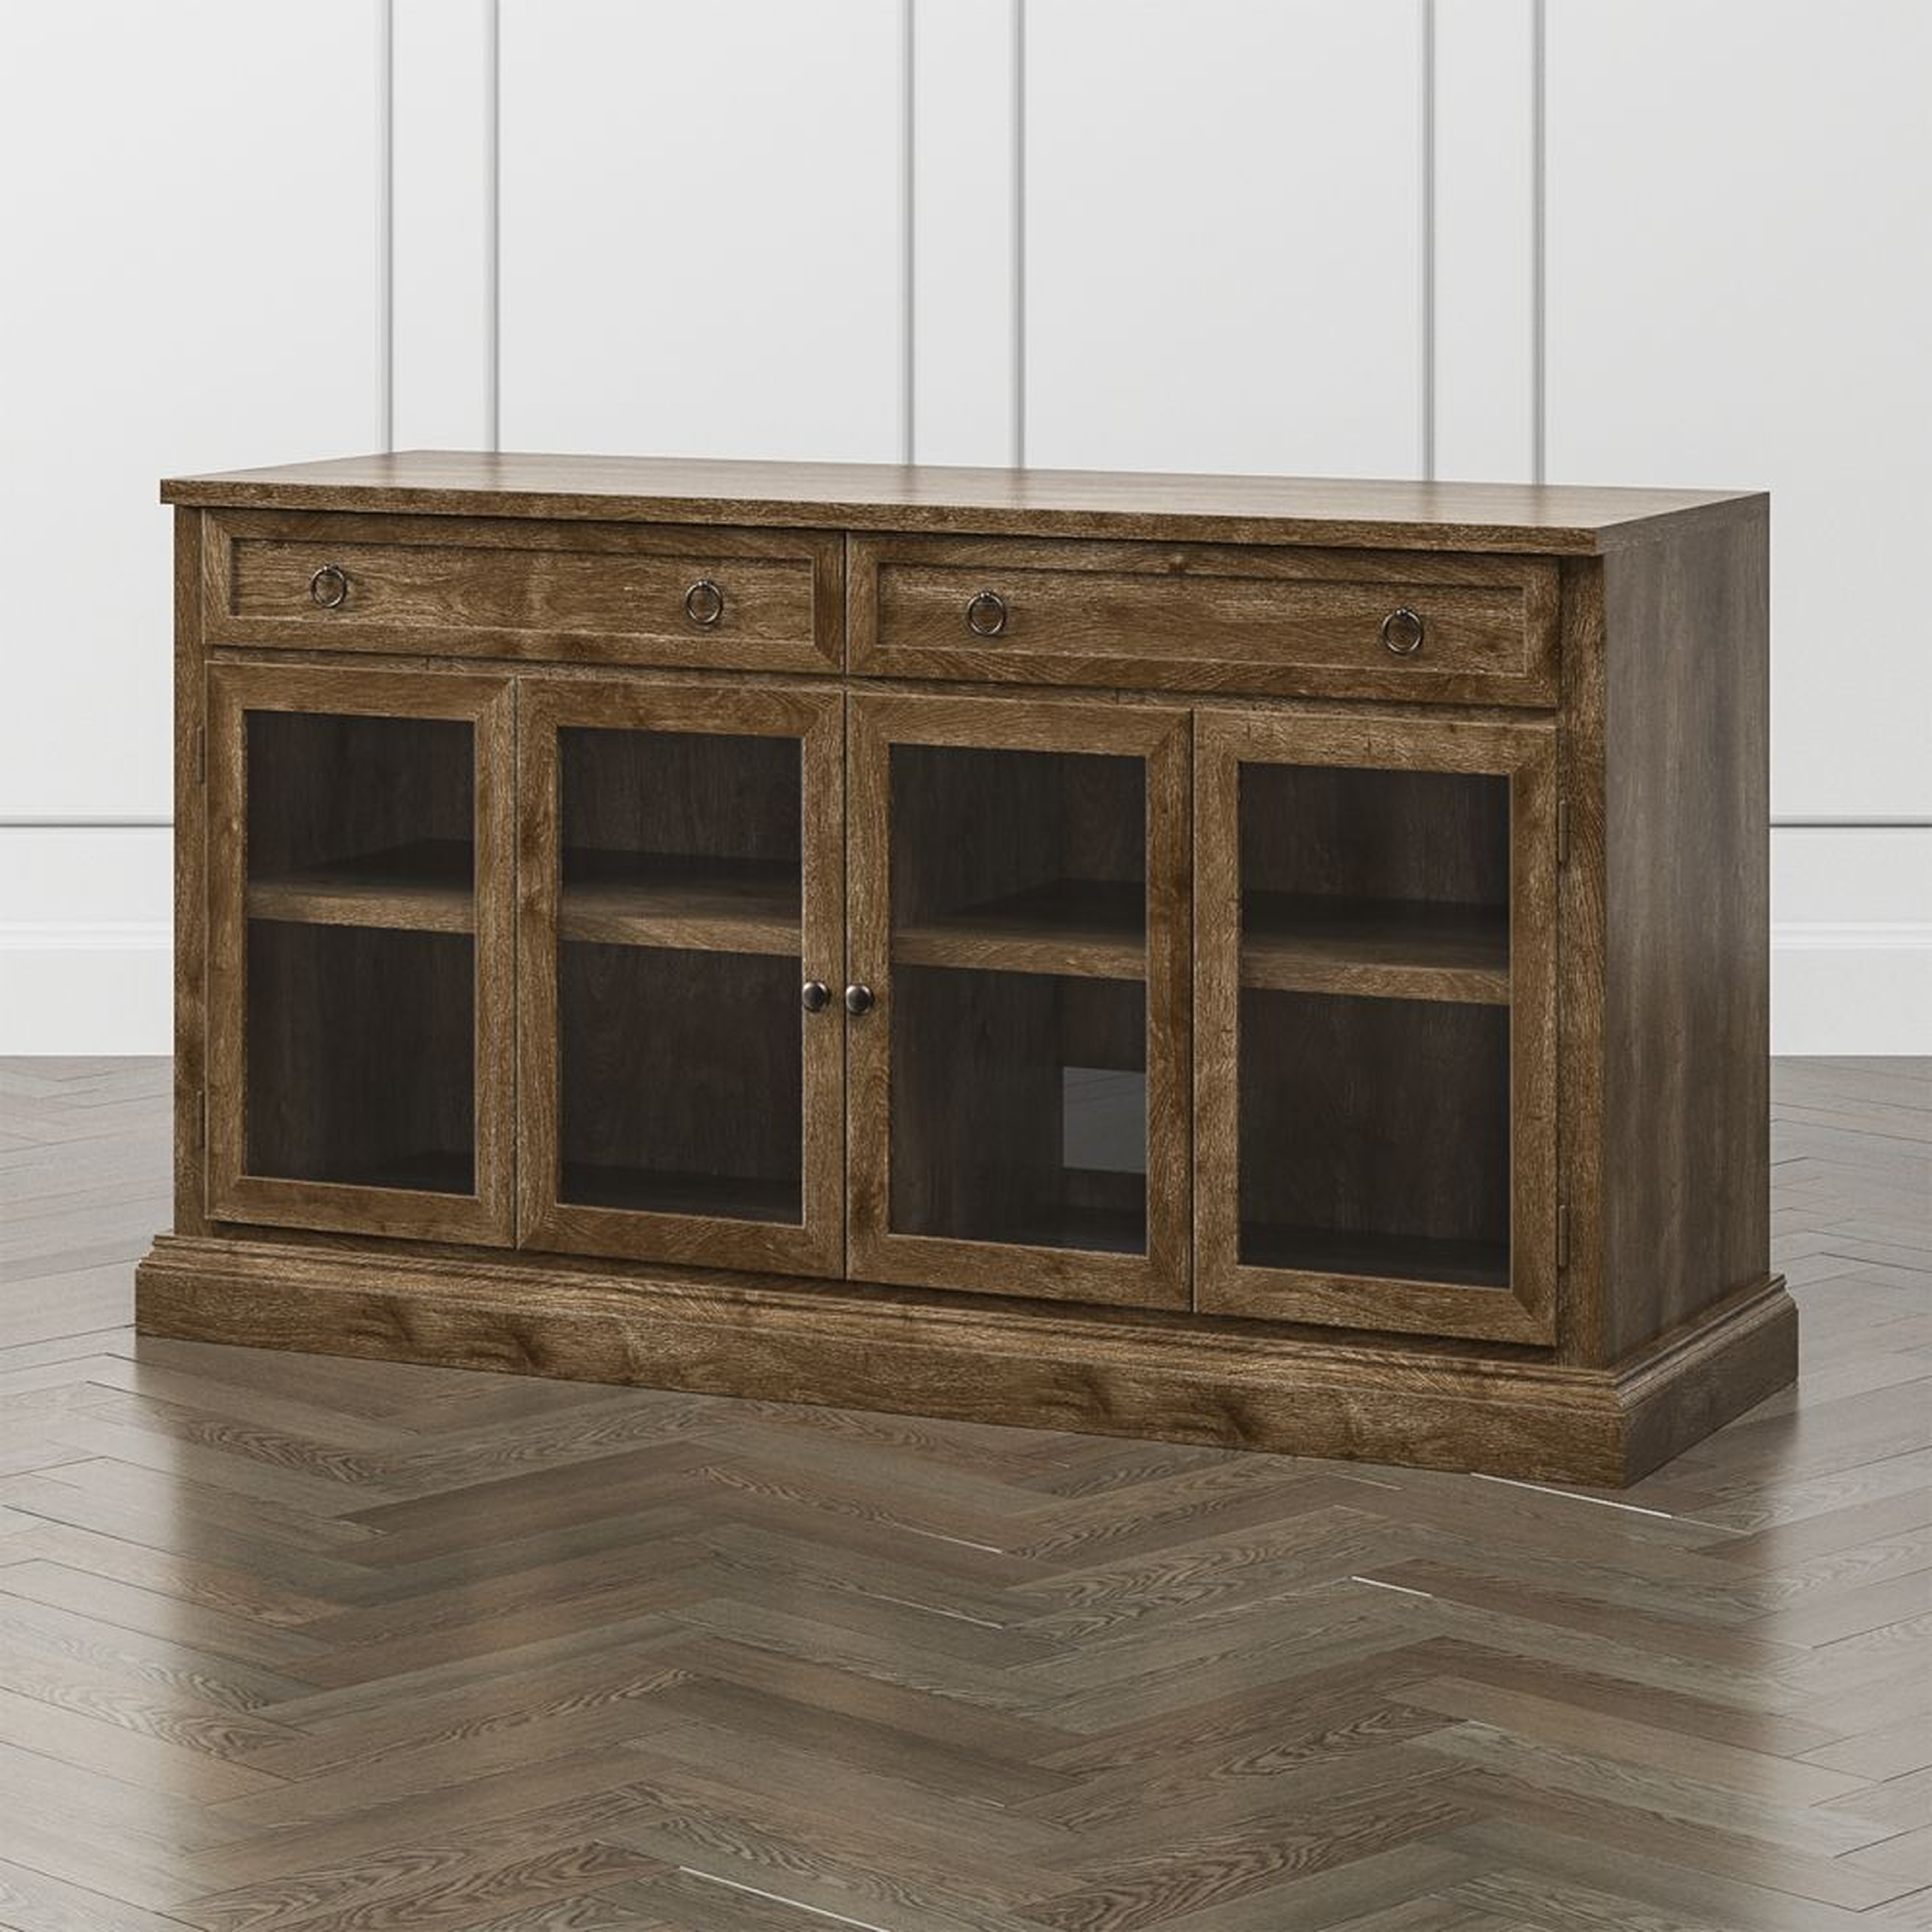 Cameo Nero Noce 62" Modular Media Console with Glass Doors - Crate and Barrel